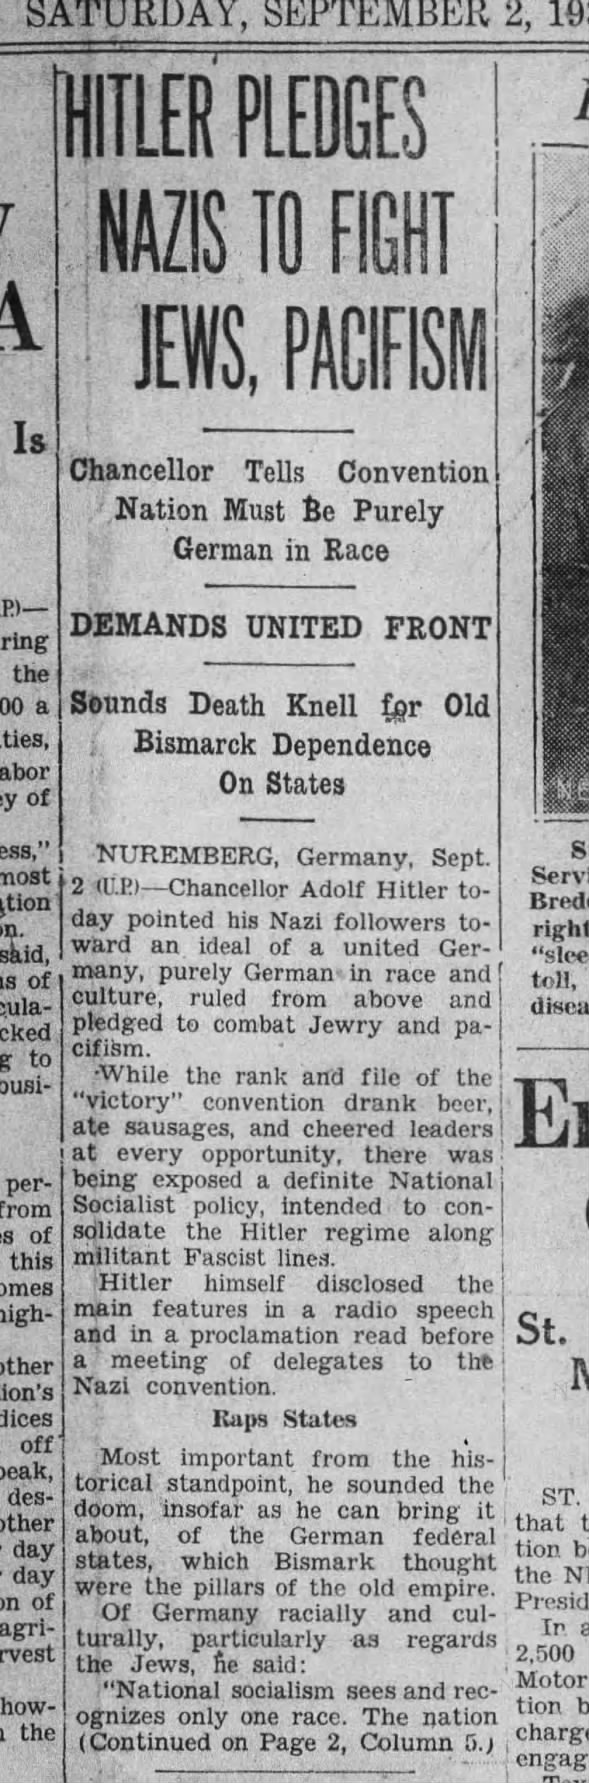 Hitler Pledges Nazi's To Fight Jews, Pacifism